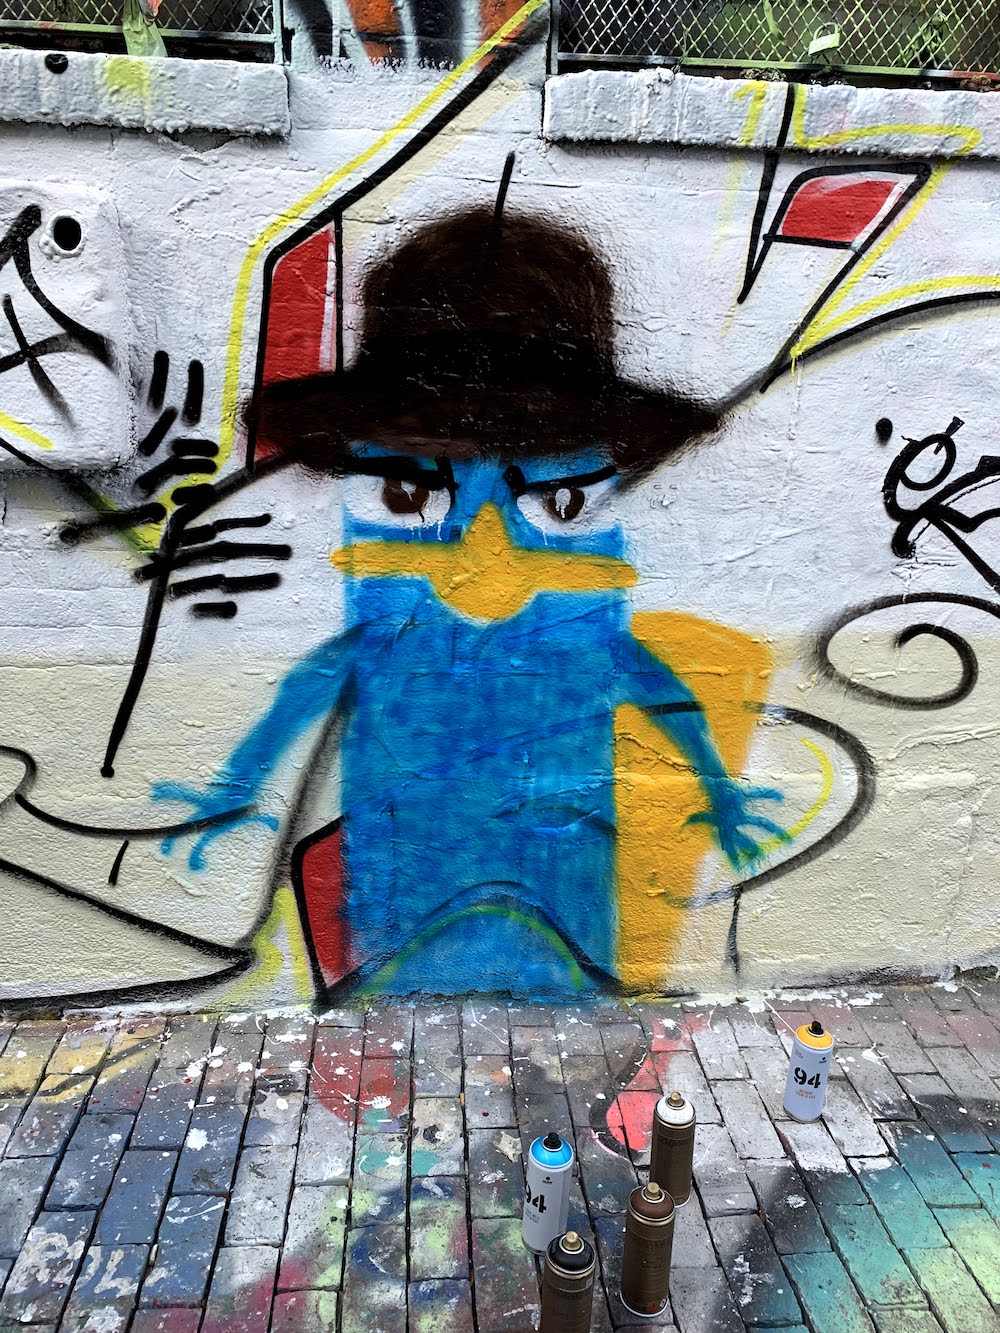 A LARGE! graffiti of Perry the Platypus.